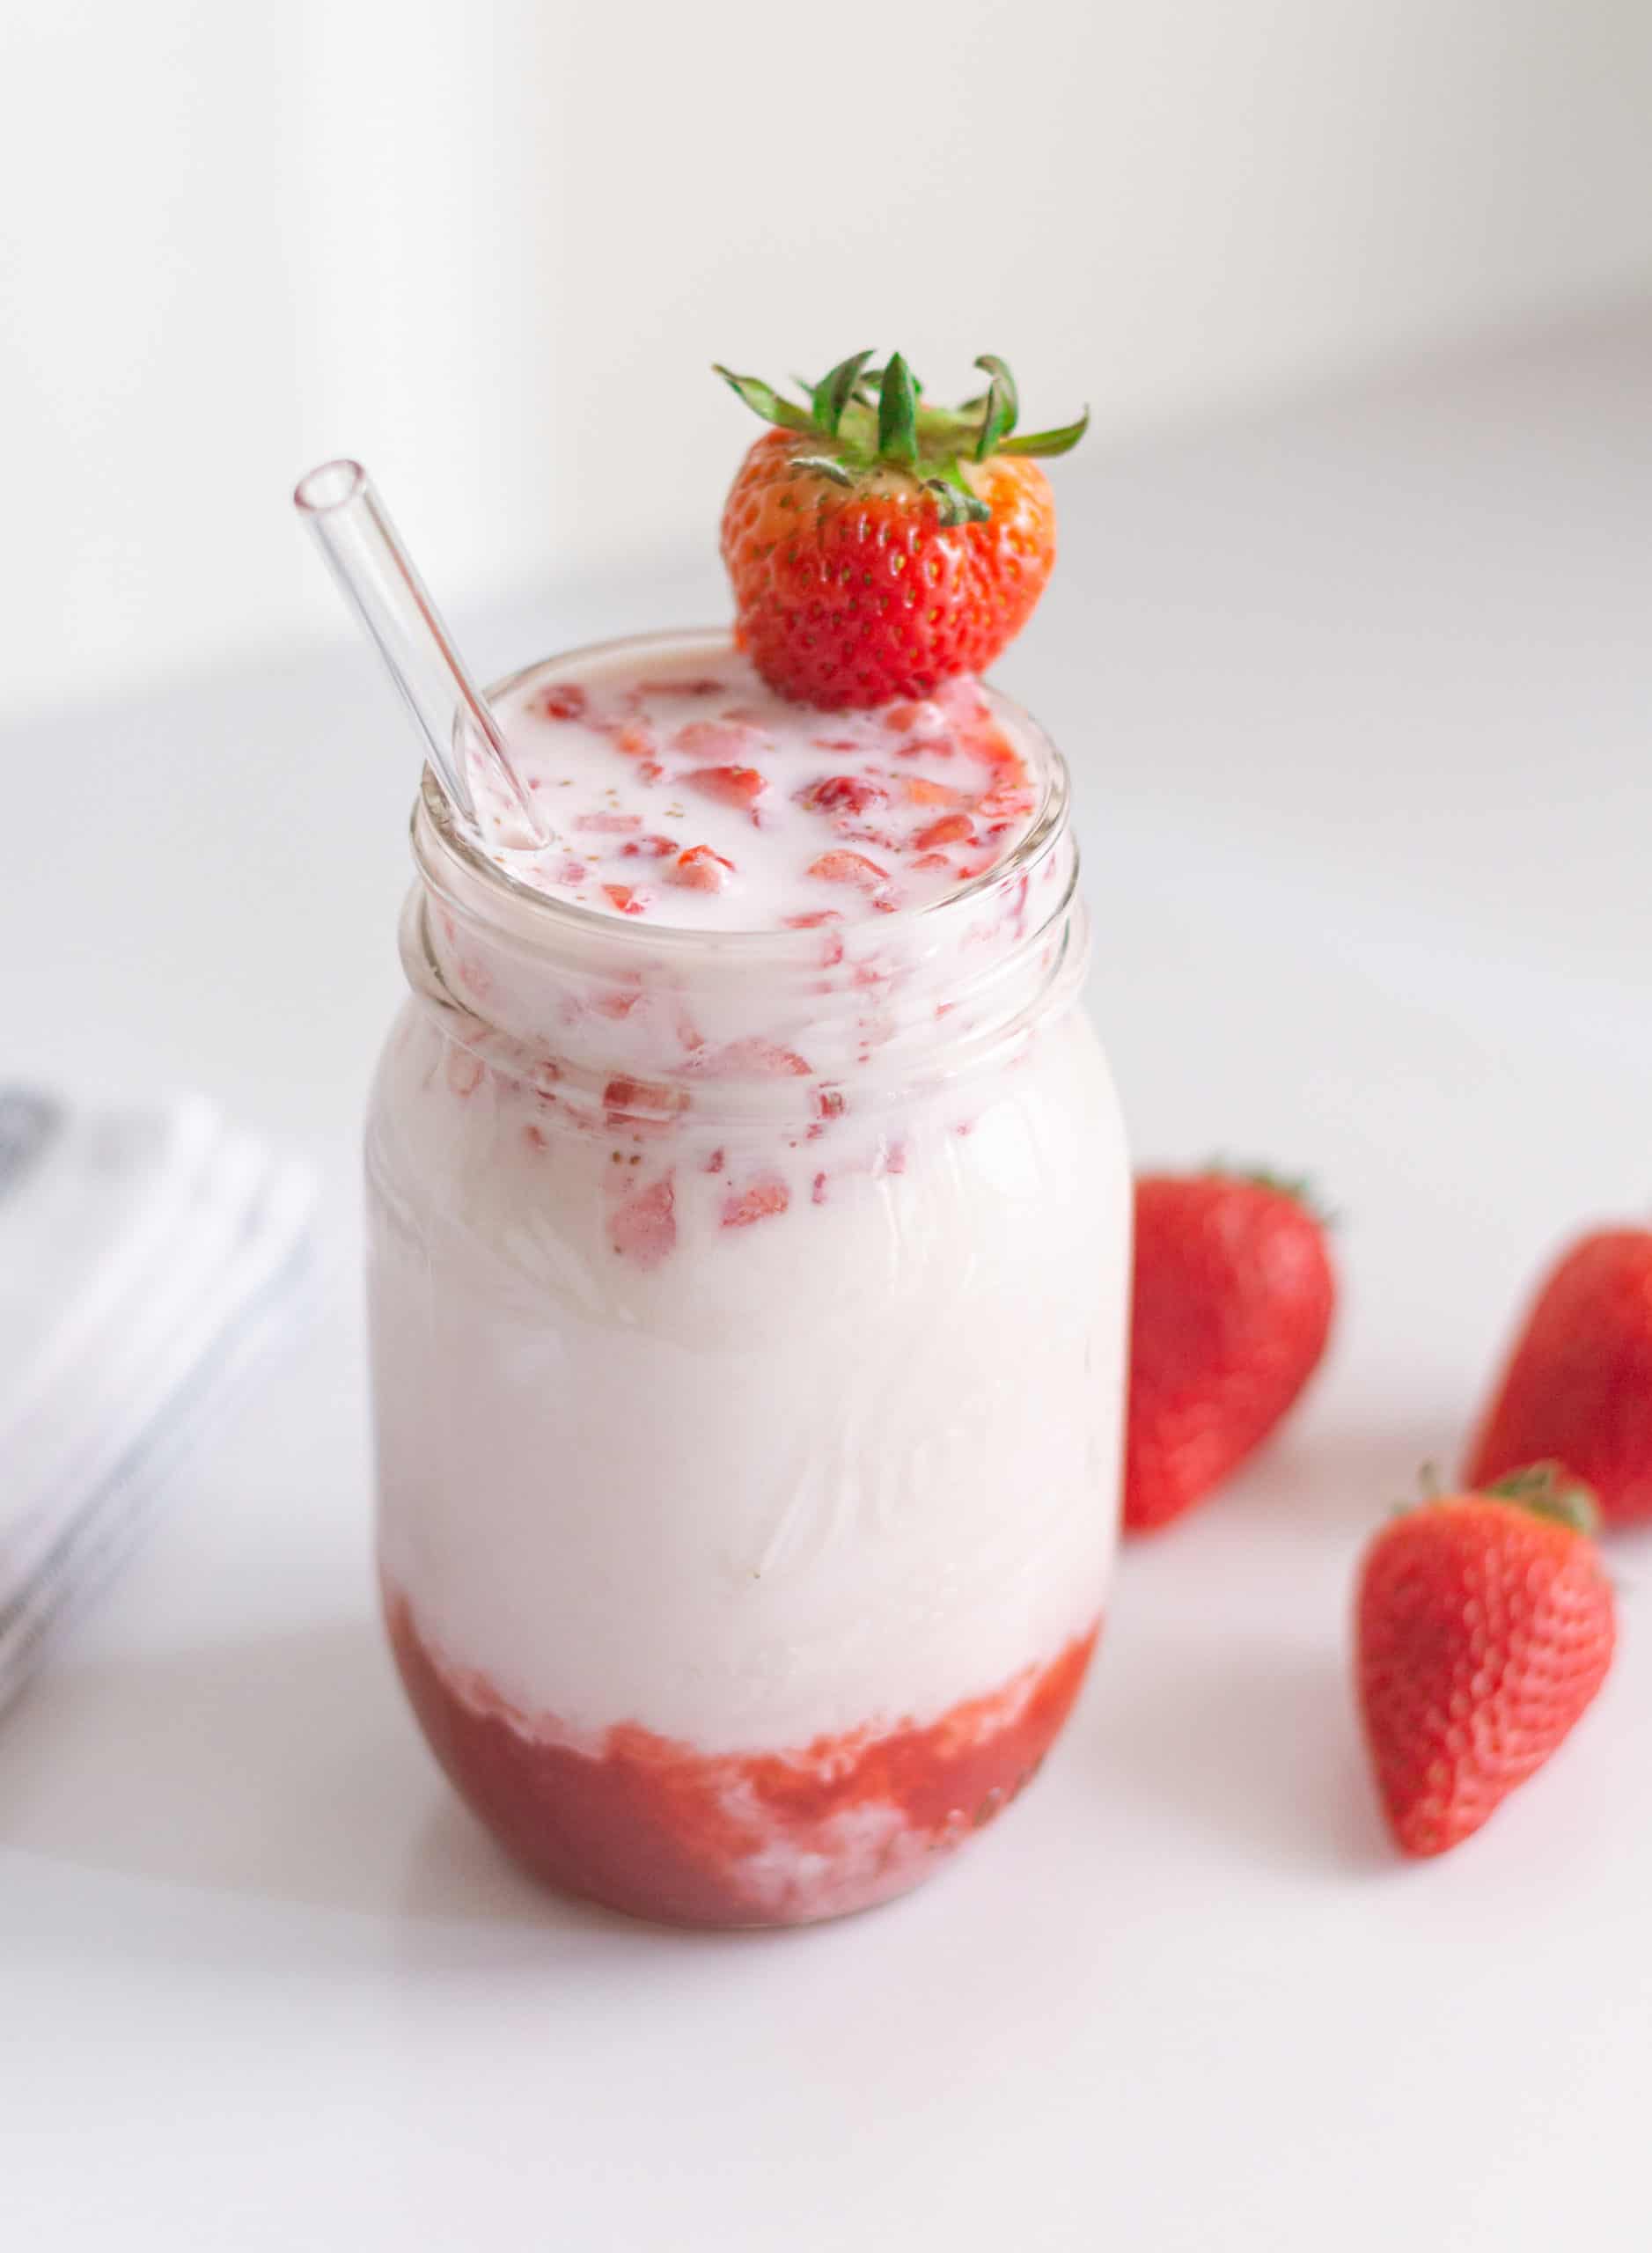 Strawberry Milk - This Healthy Table